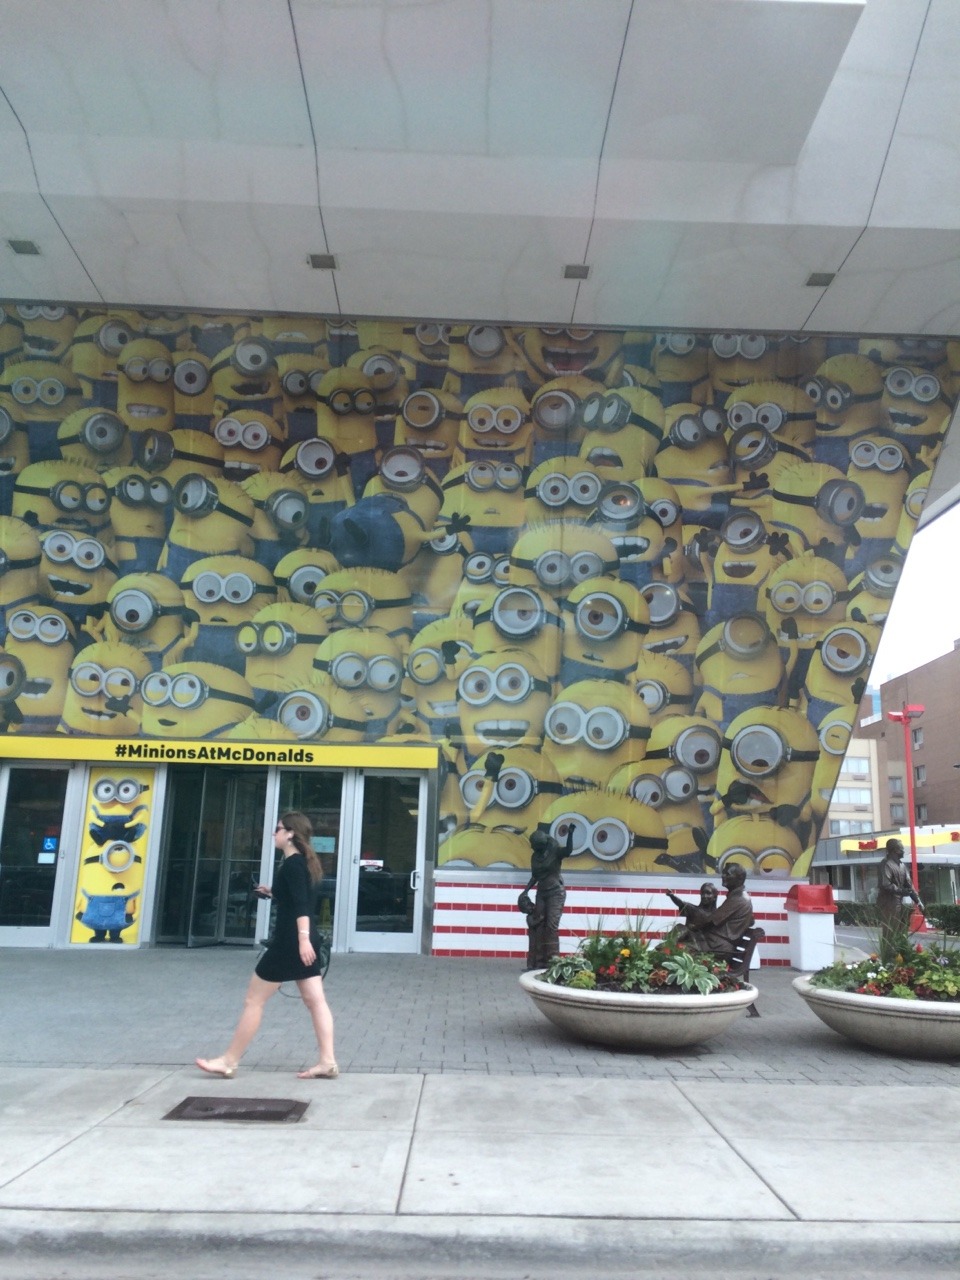 Minions are Terrible - Here's Why 18